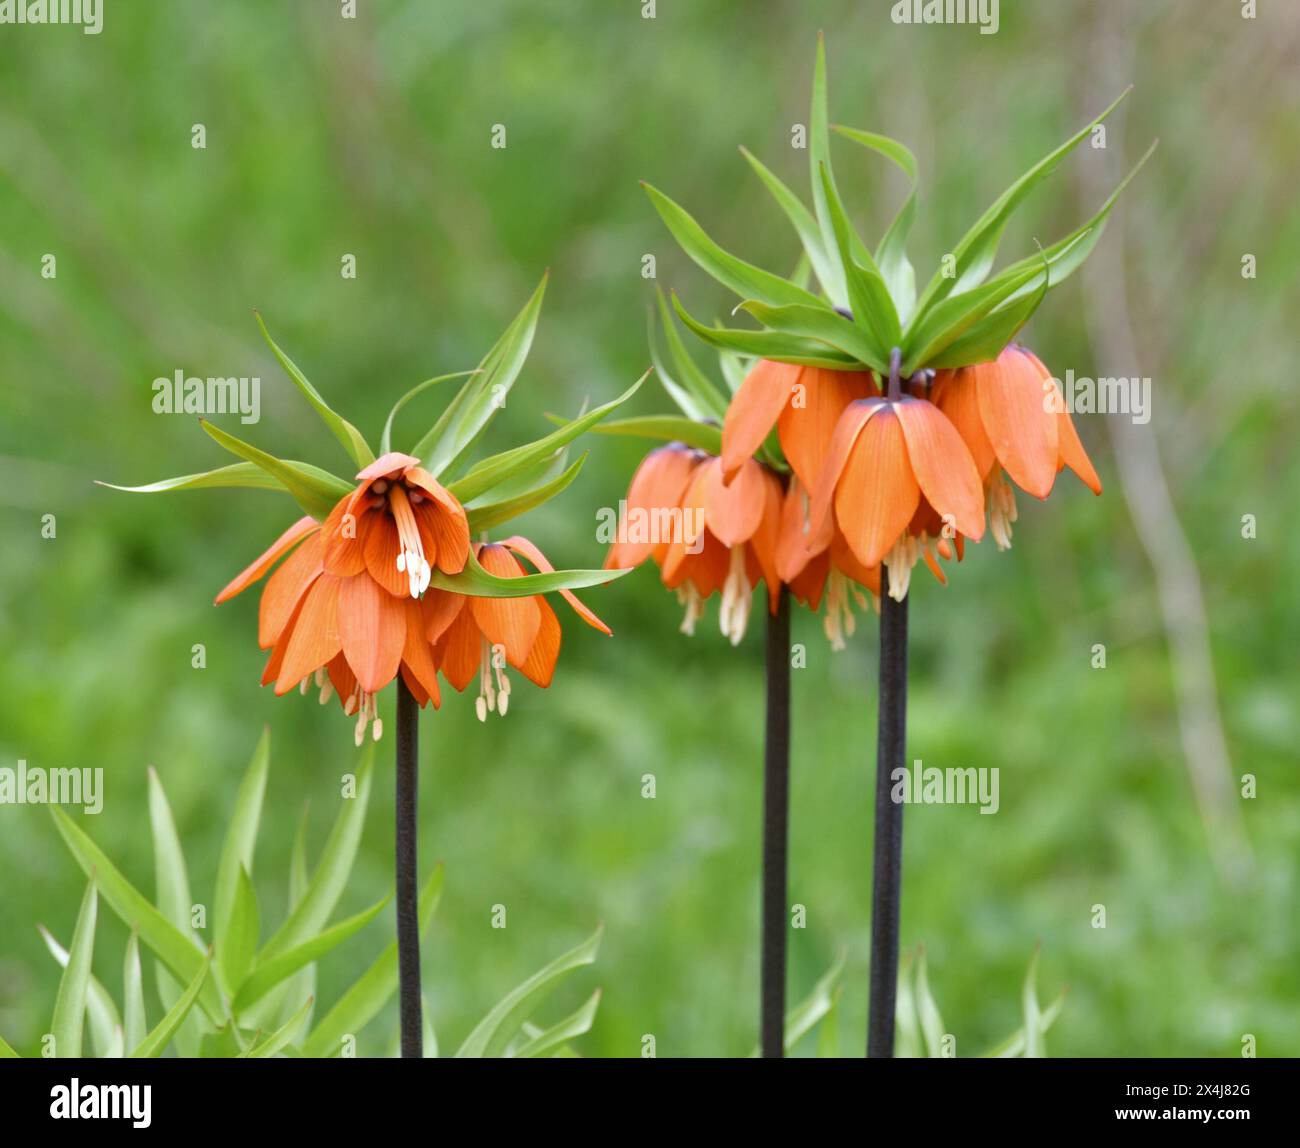 Fritillaria Imperialis rubra Maxima - bulbous flower blooming in an early spring Stock Photo